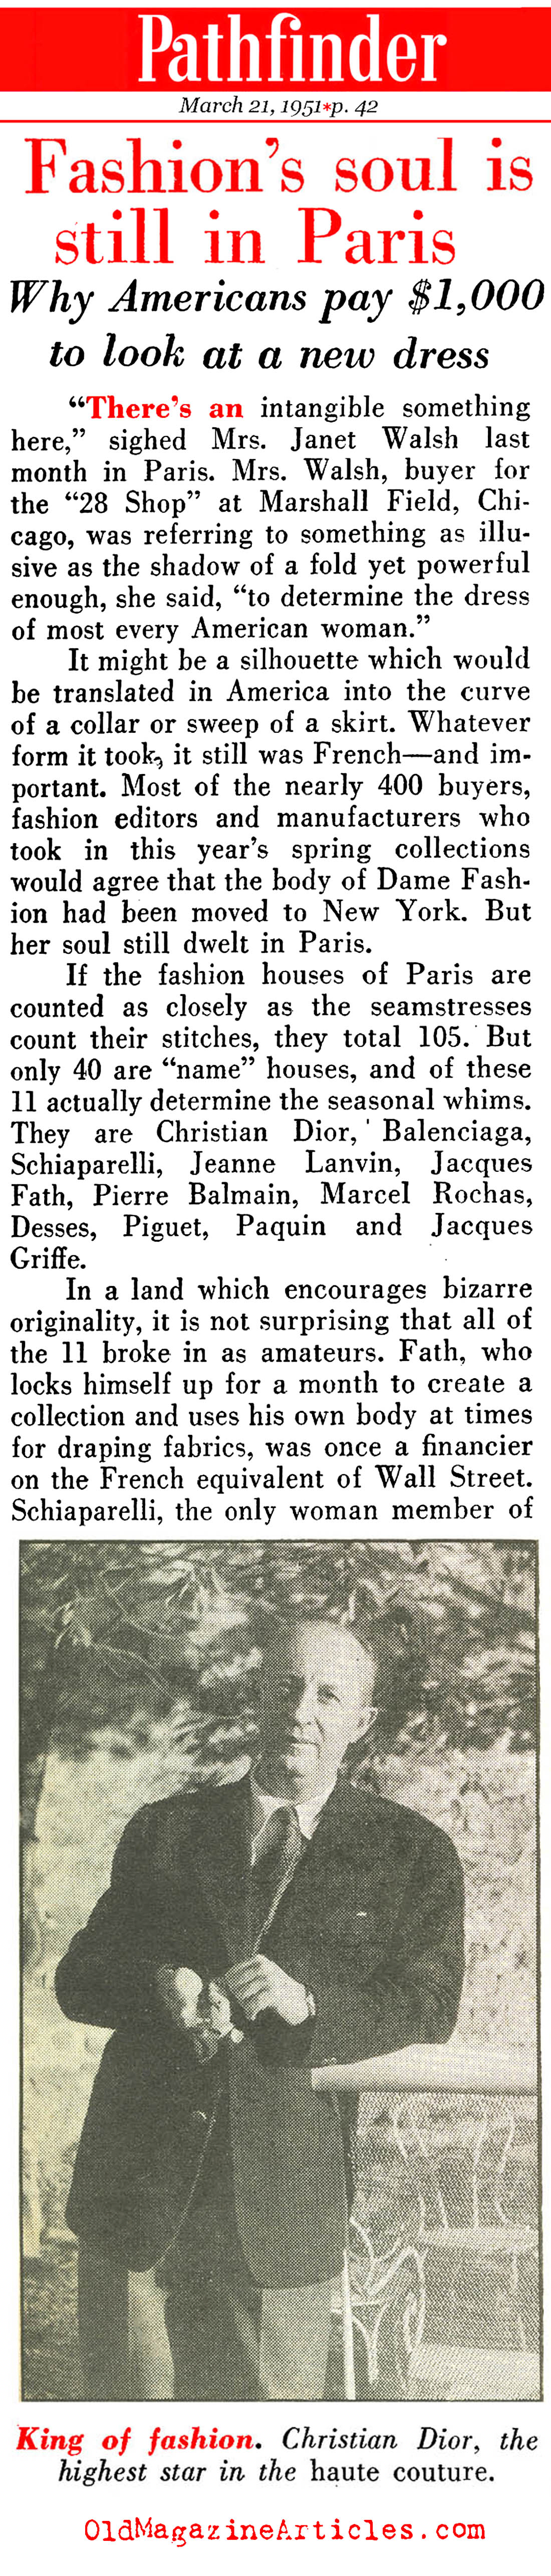 Setting the Trends from Paris (Pathfinder Magazine, 1951)